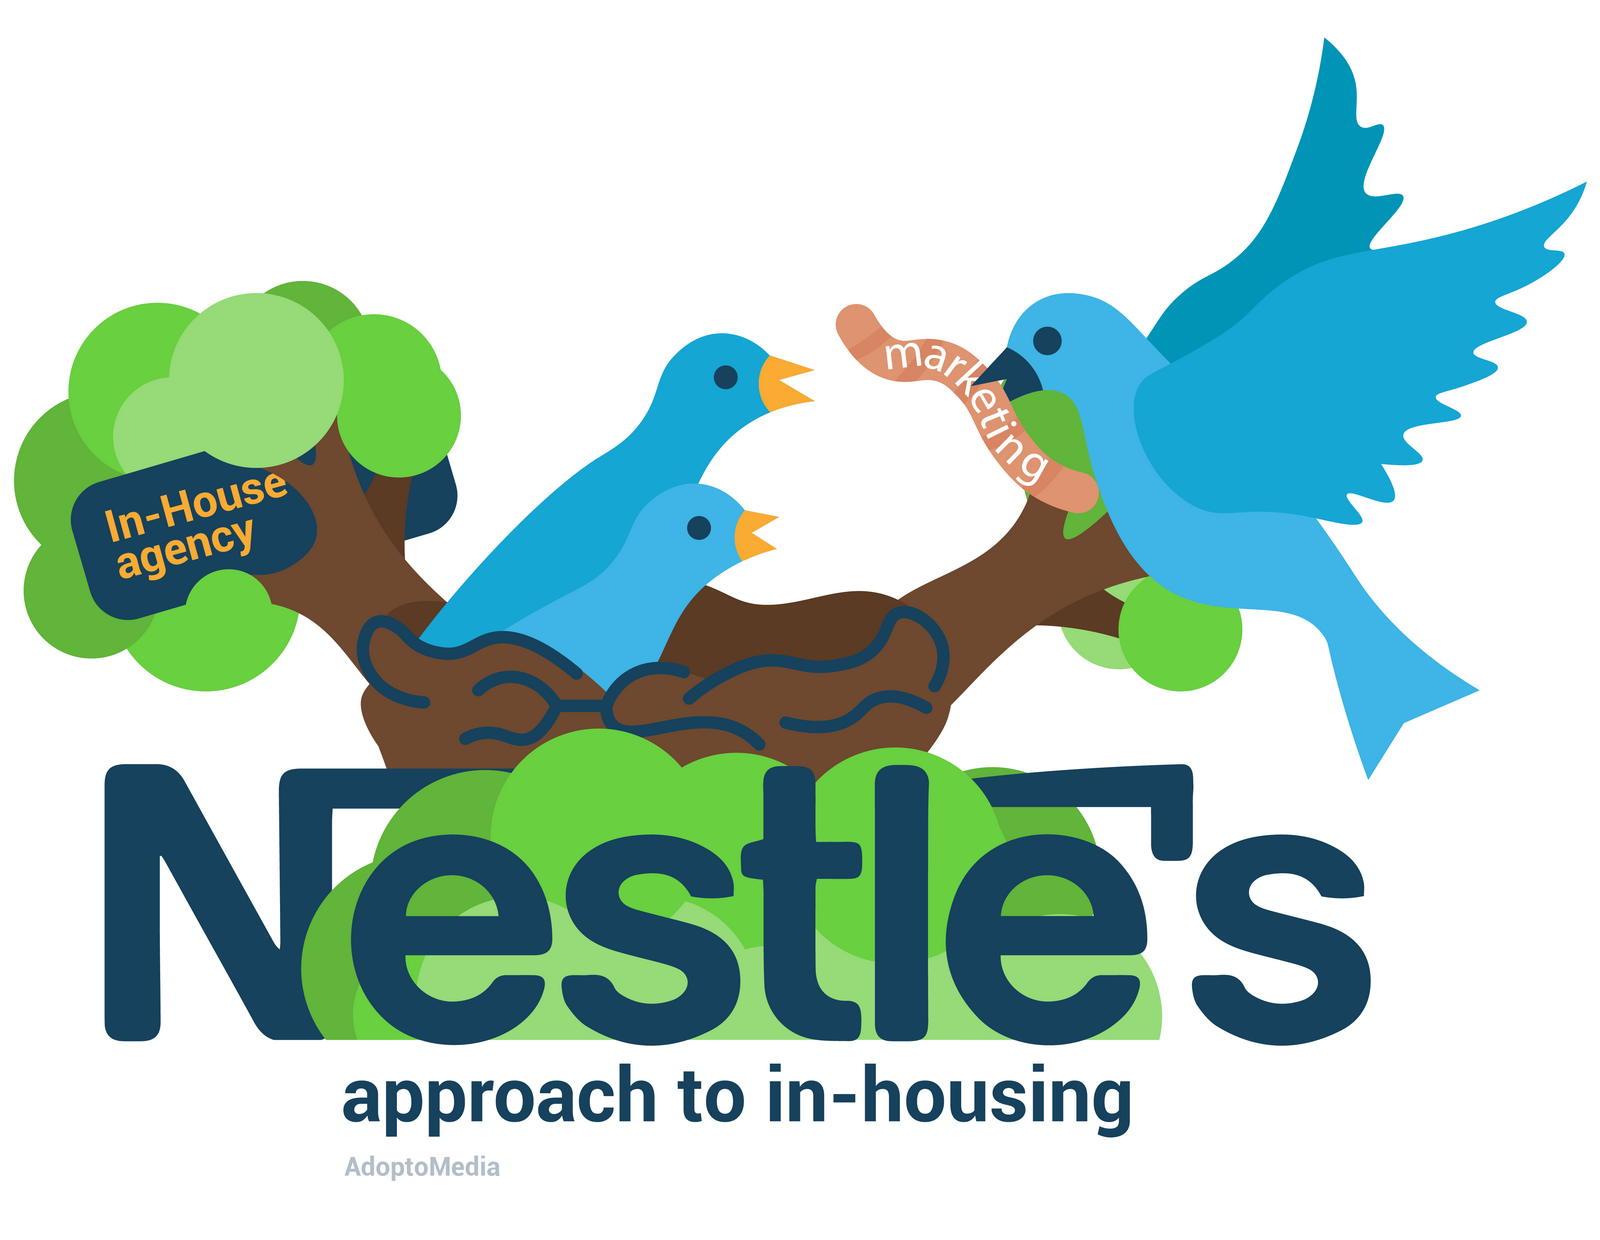 Nestlé, hybrid approach to in-housing, effective marketing